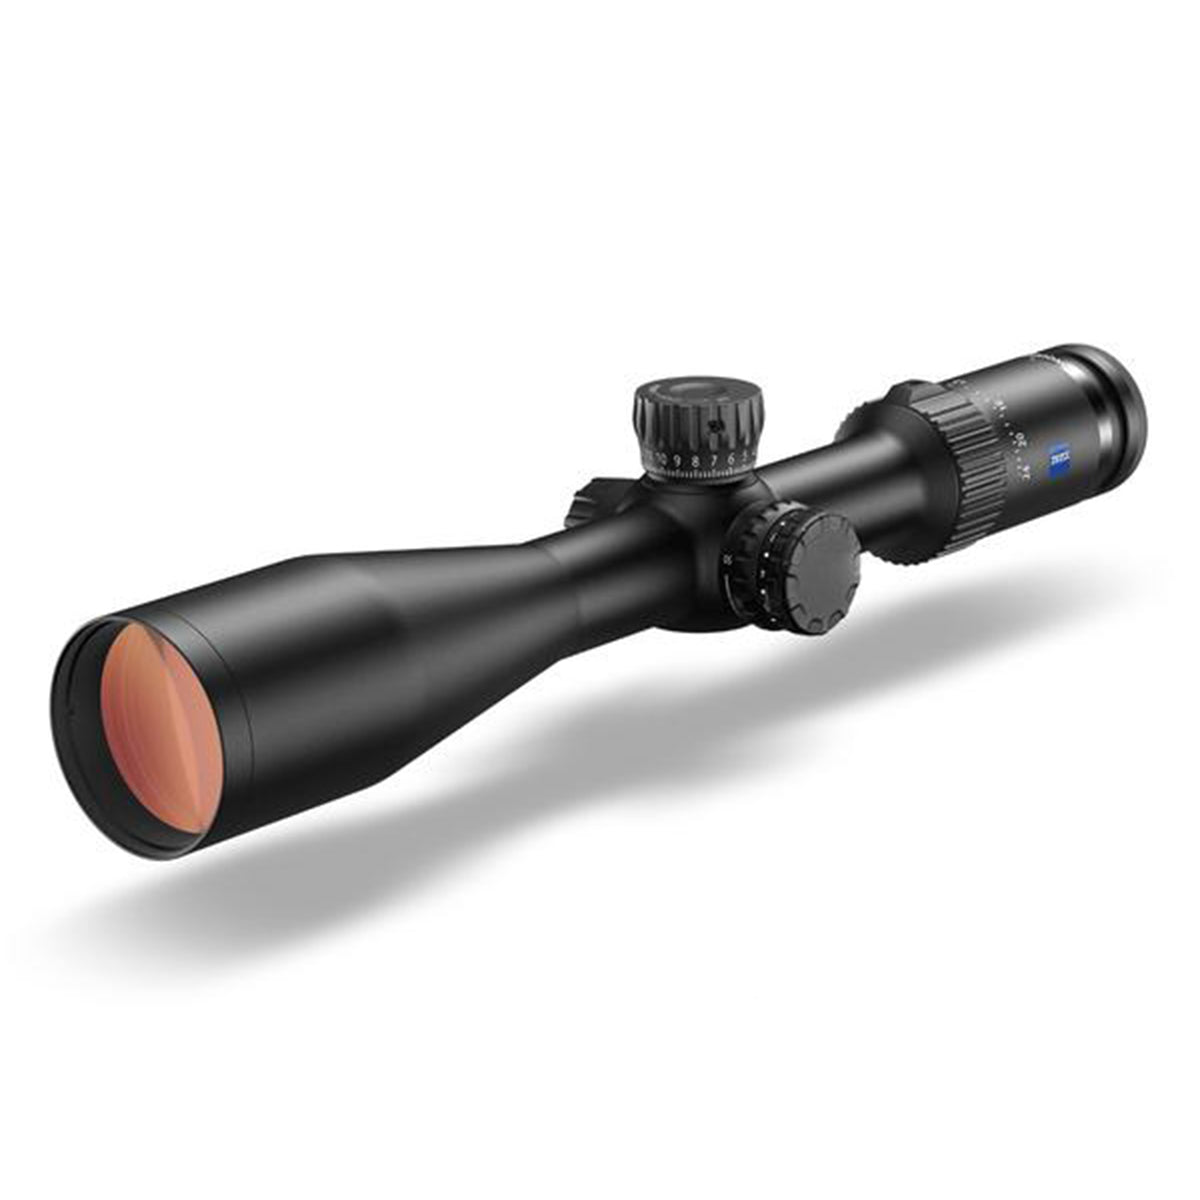 Zeiss Conquest V4 6-24x50 ZMOA-1 #93 Reticle Riflescope in Zeiss Conquest V4 6-24x50 Riflescope by Zeiss | Optics - goHUNT Shop by GOHUNT | Zeiss - GOHUNT Shop